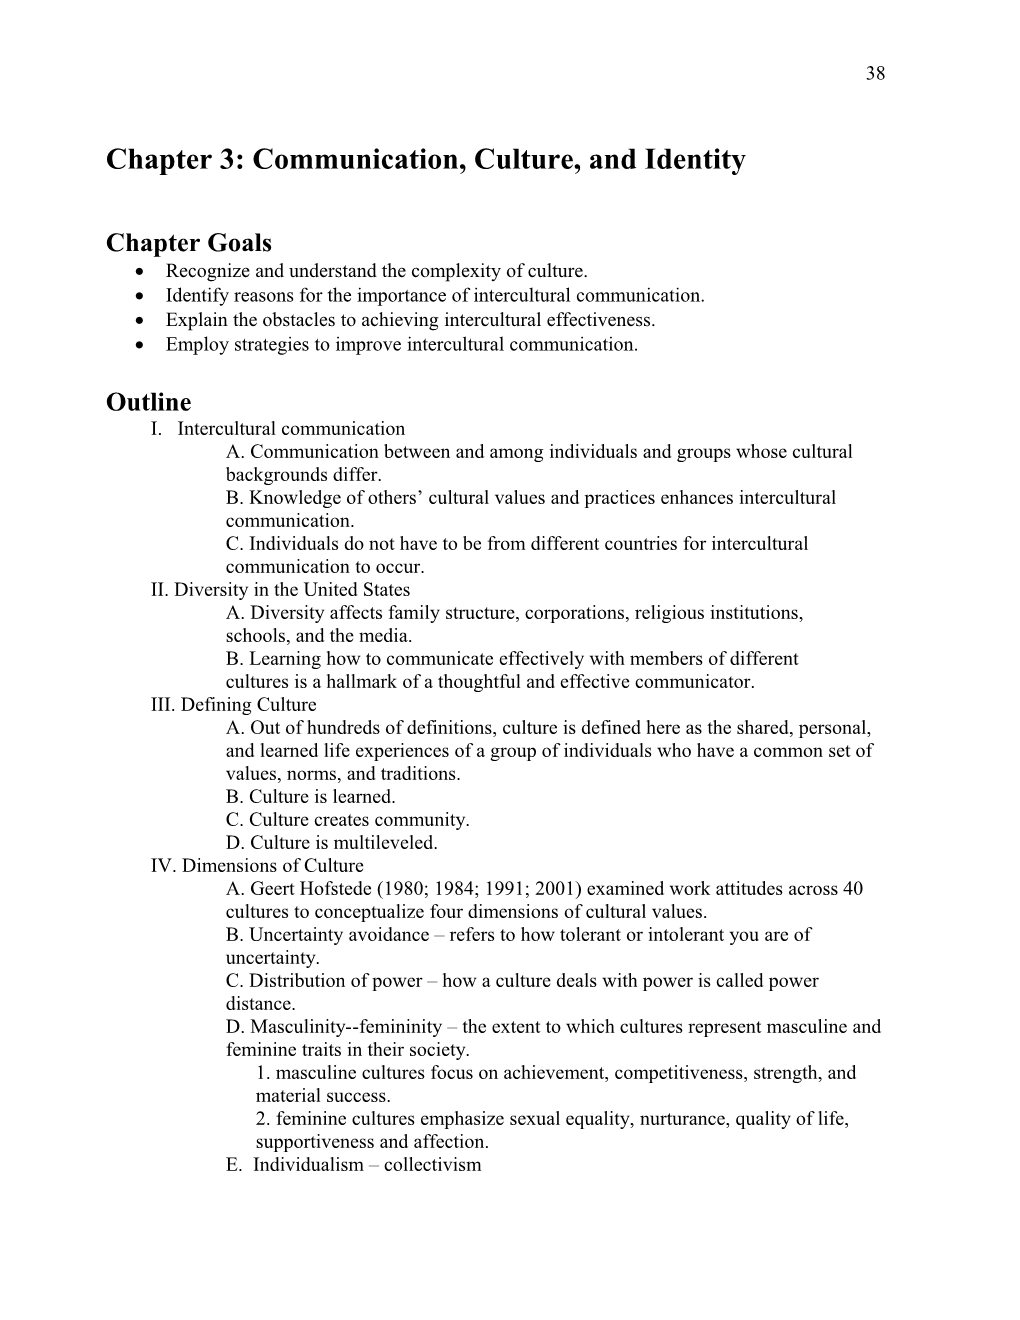 Chapter 3: Communication, Identity, and the Self